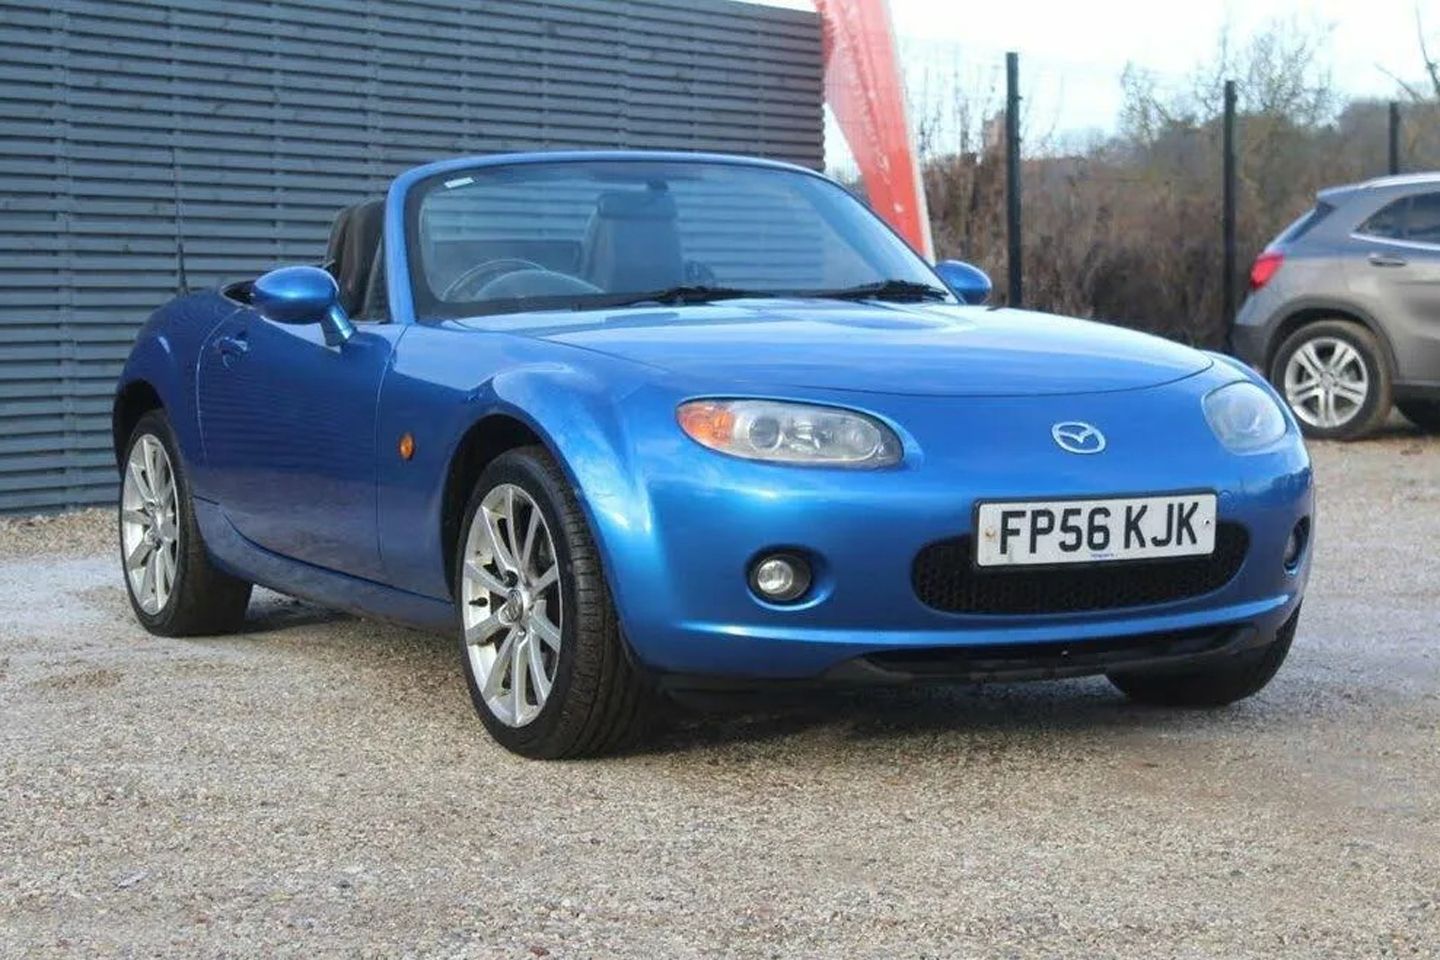 How to adjust the bonnet latch in an MX5 NC? - Body, Interior & Styling -  MX-5 Owners Club Forum